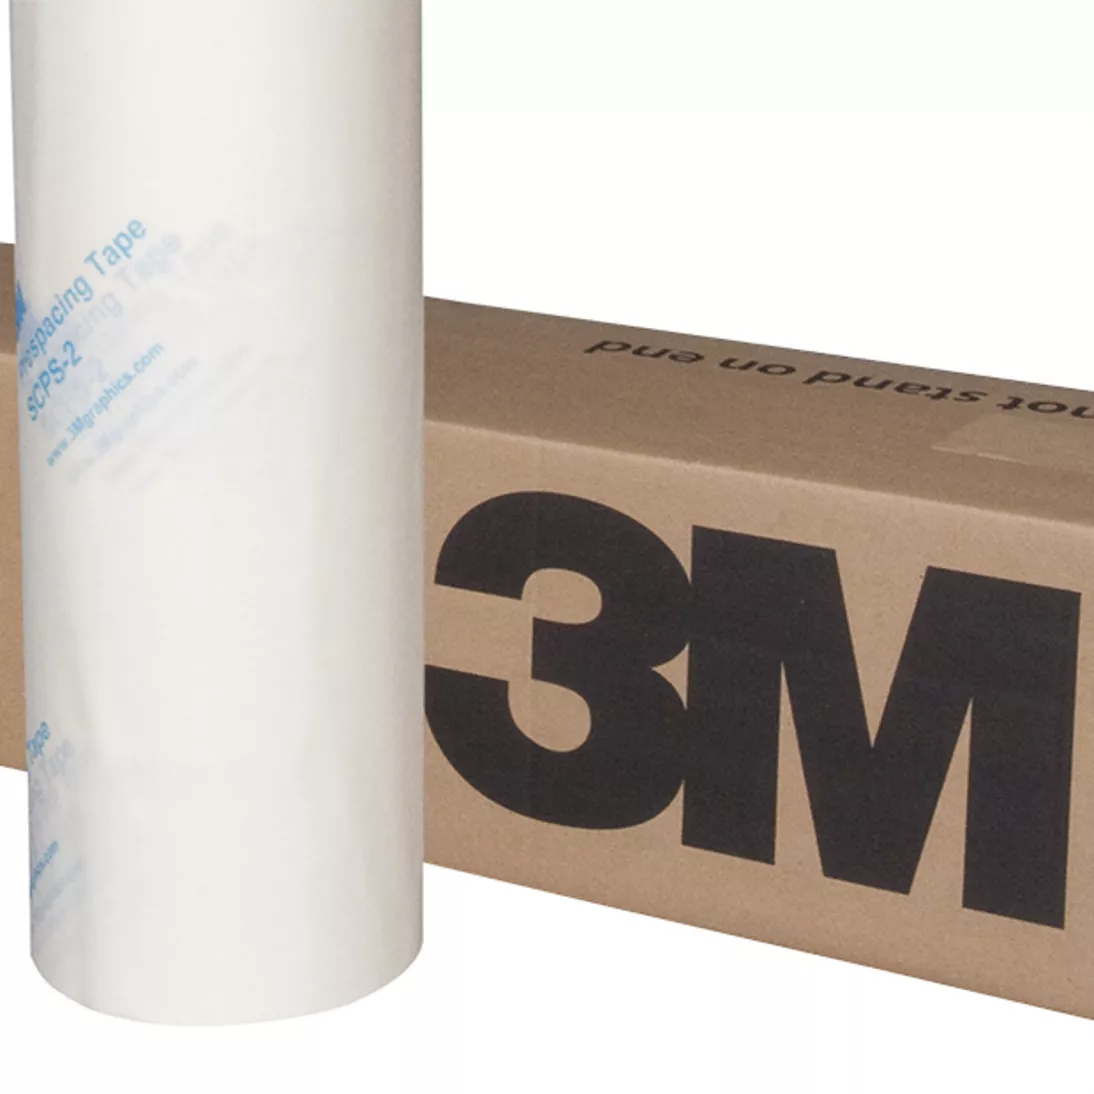 3M™ Prespacing Tape SCPS-2, 24 in x 250 yd, 1 Roll/Case